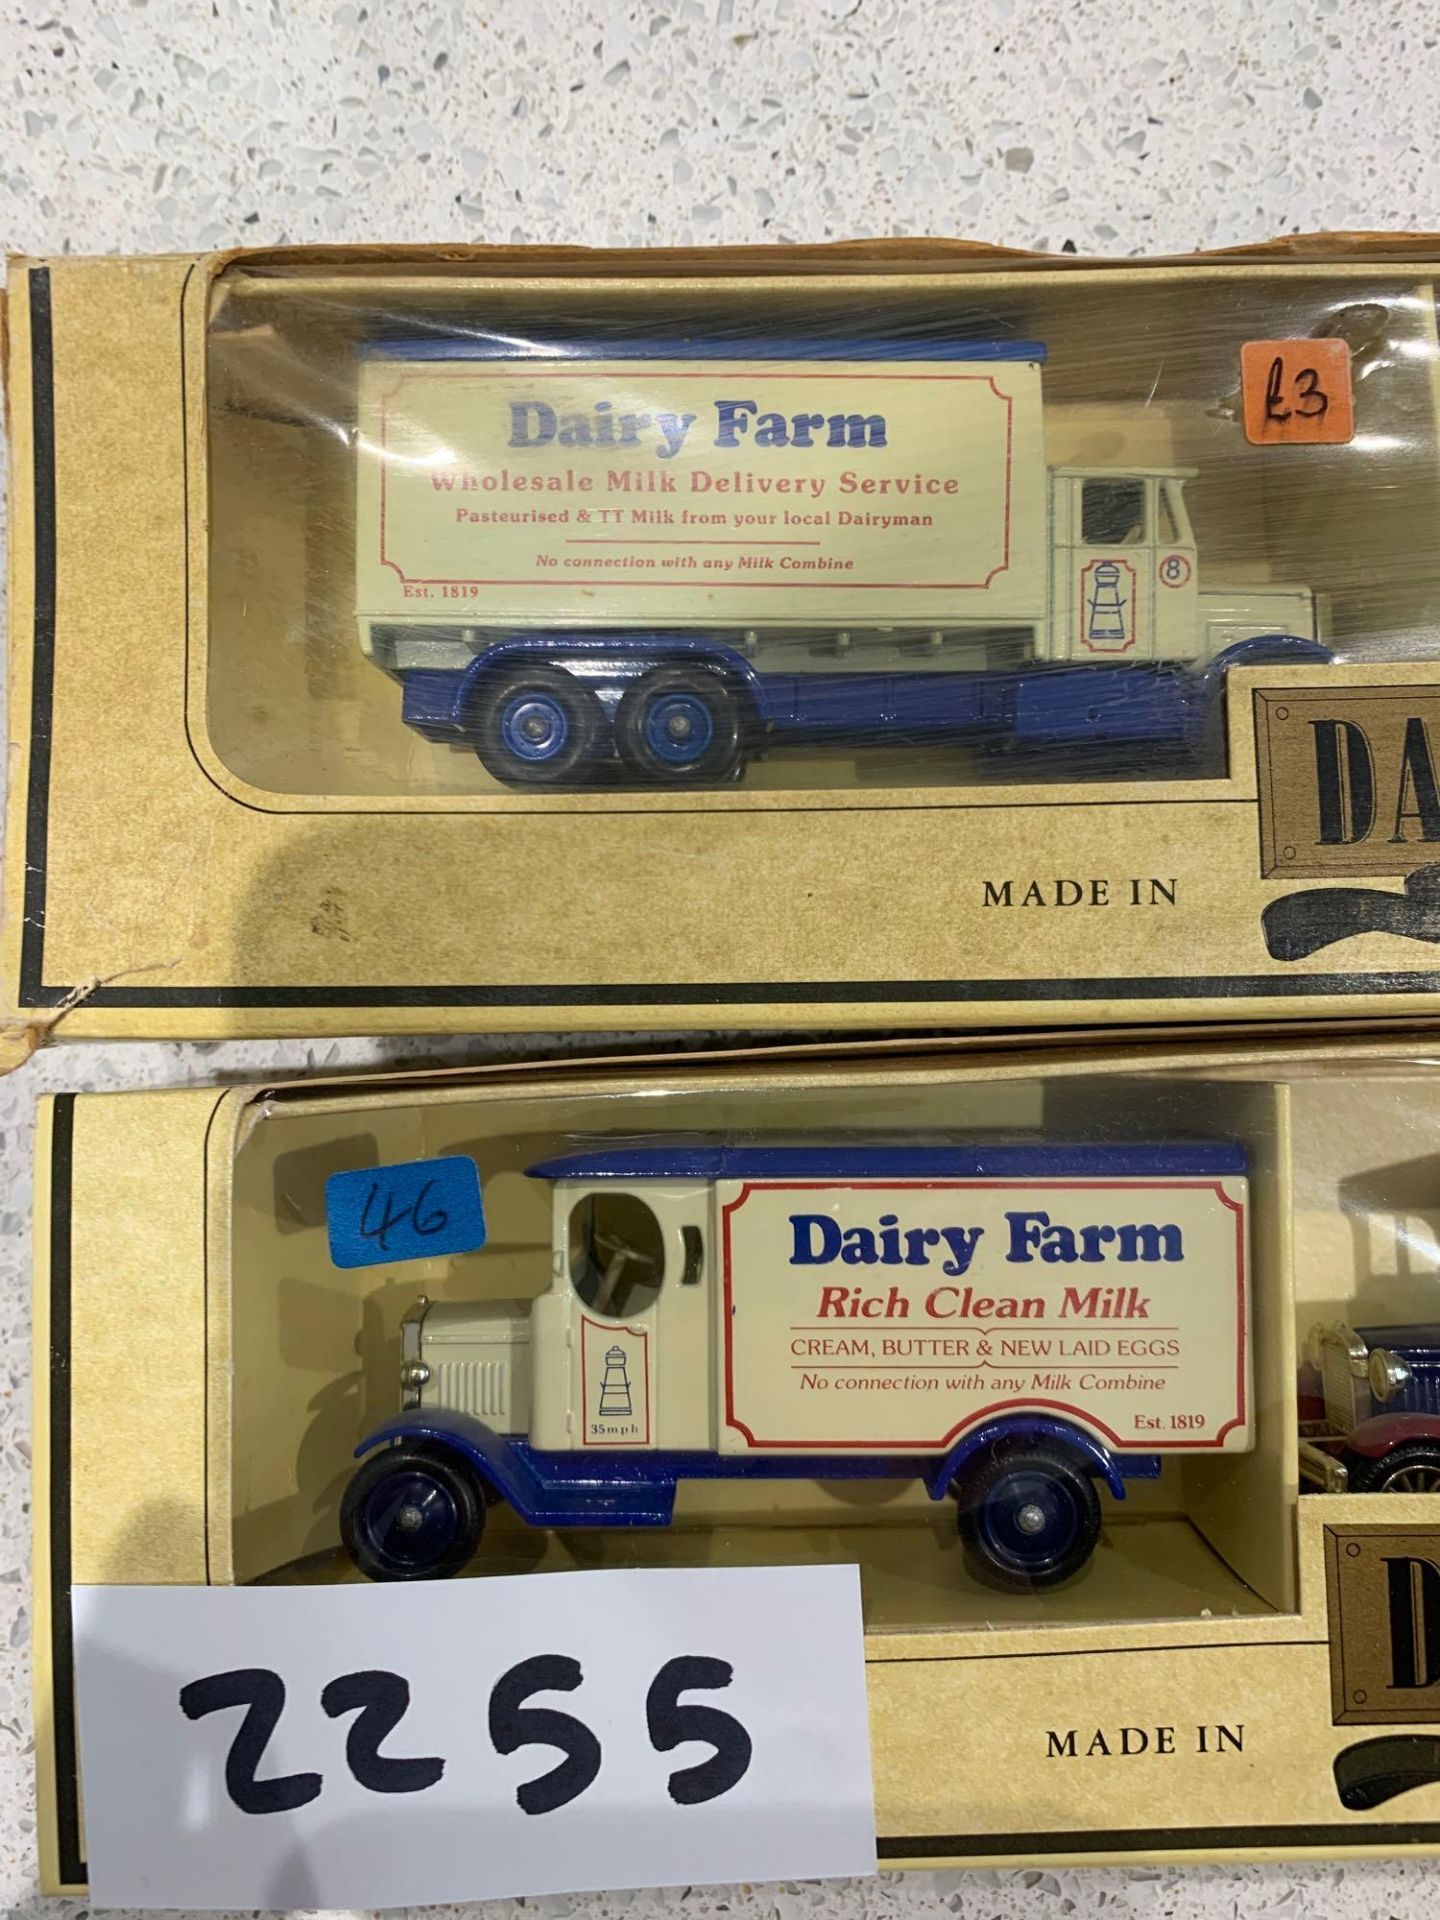 2 x Lledo 3 car sets 2 x Lledo 3 car sets Both Are Dairy Farm Promtional sets - Image 2 of 5